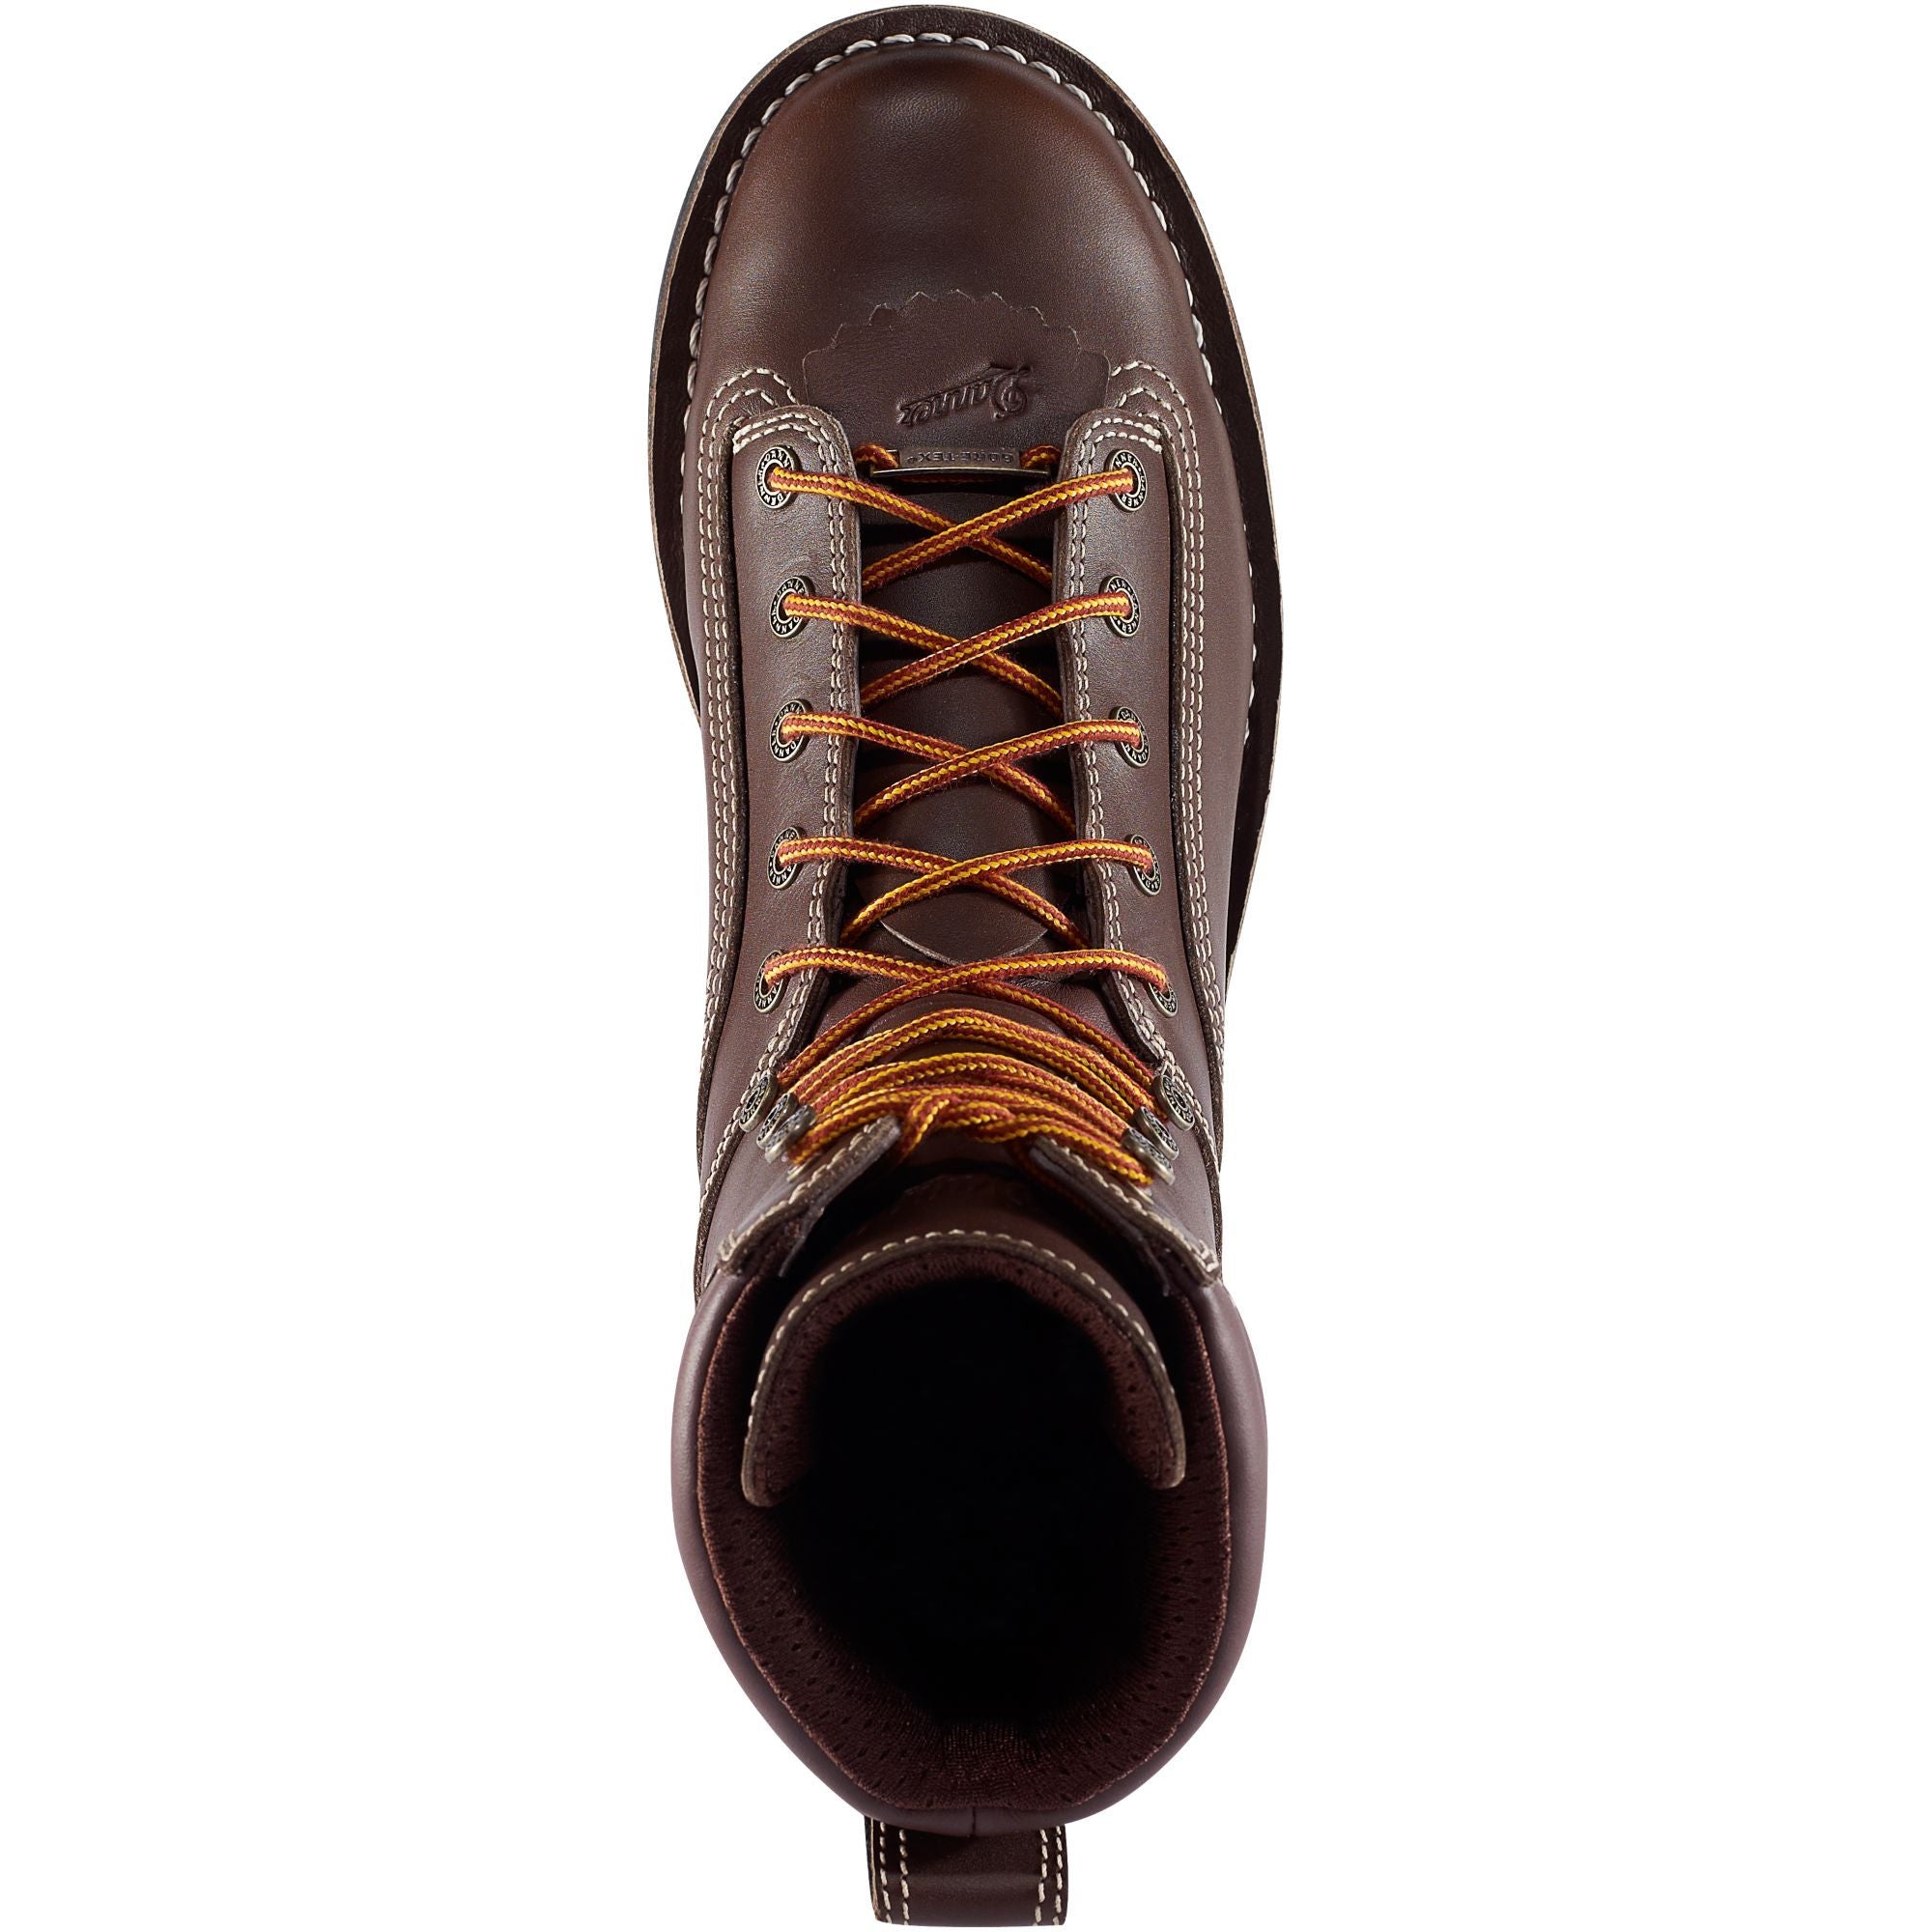 Danner Men's Quarry USA Made 8" Soft Toe WP Work Boot - Brown - 17305  - Overlook Boots